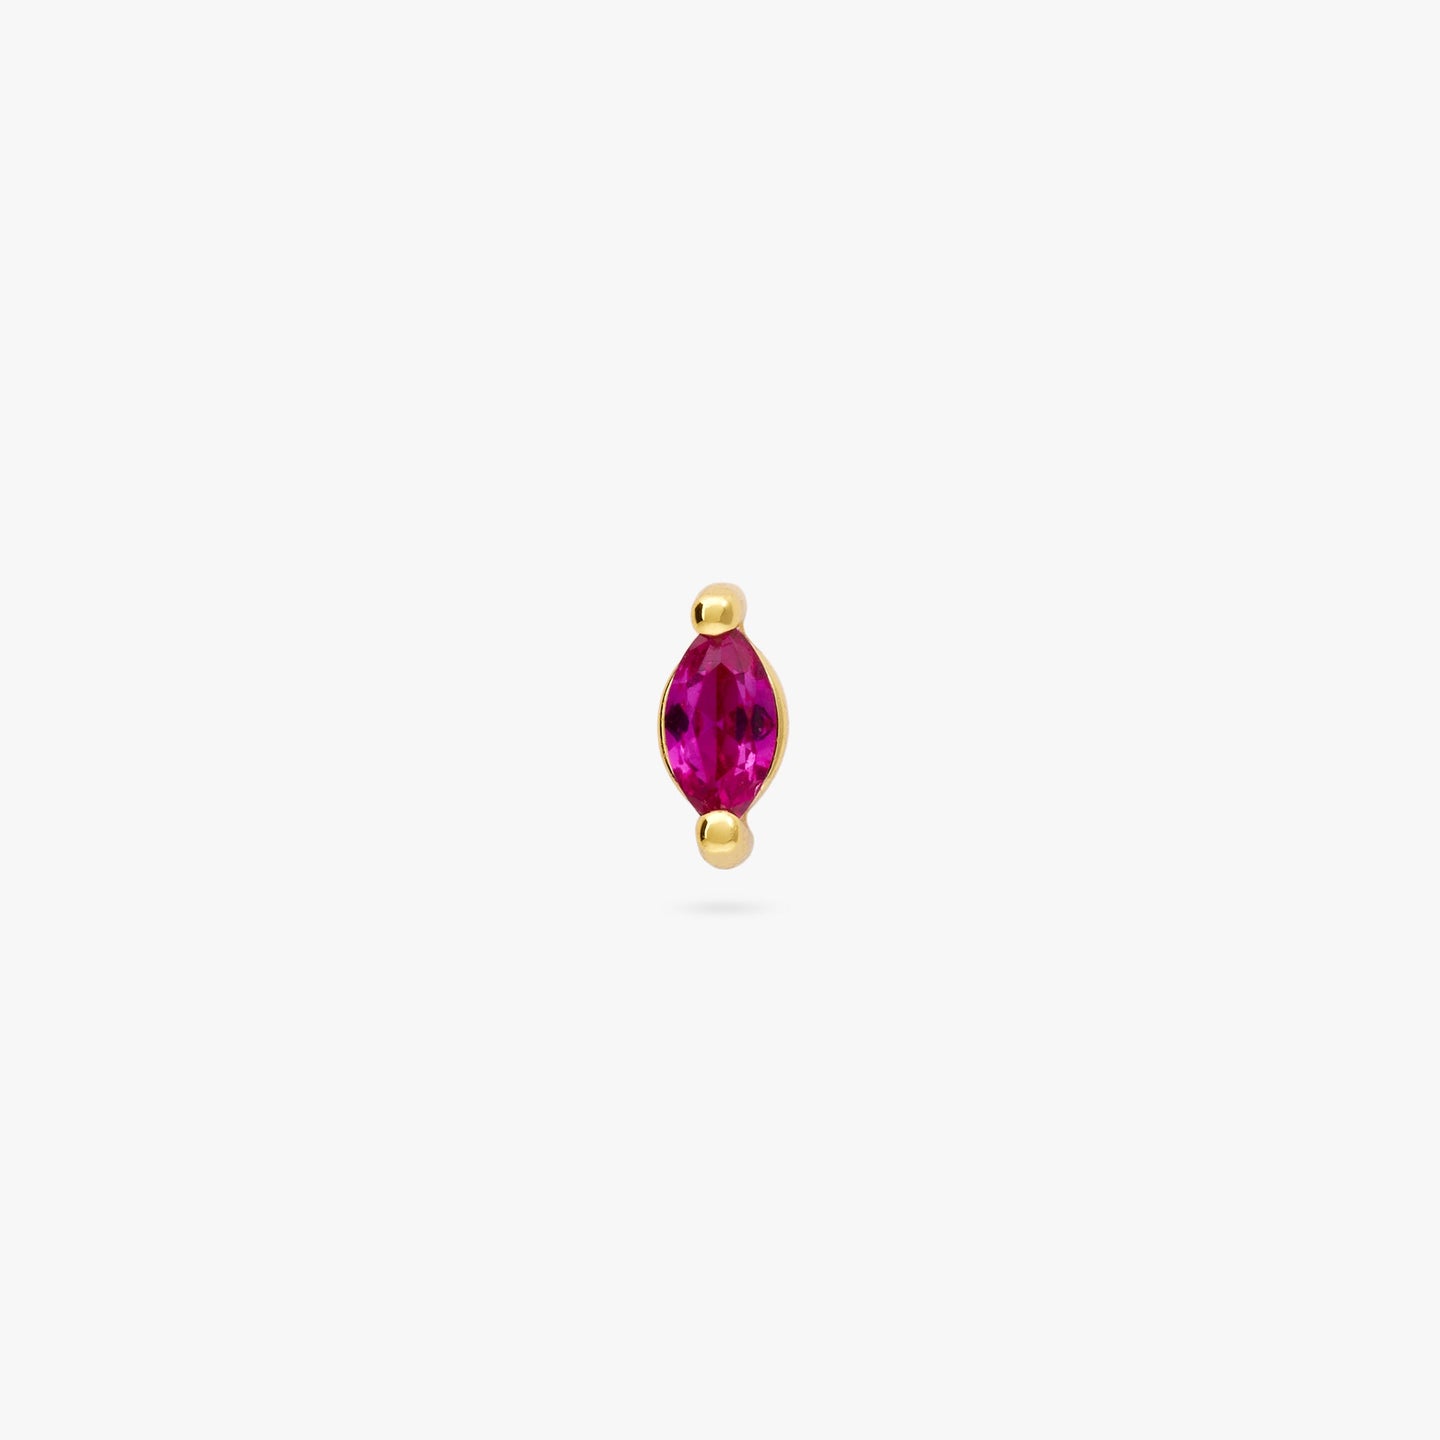 The marquise mini stud features a pink oblong shaped gem and has gold accents color:null|gold/pink